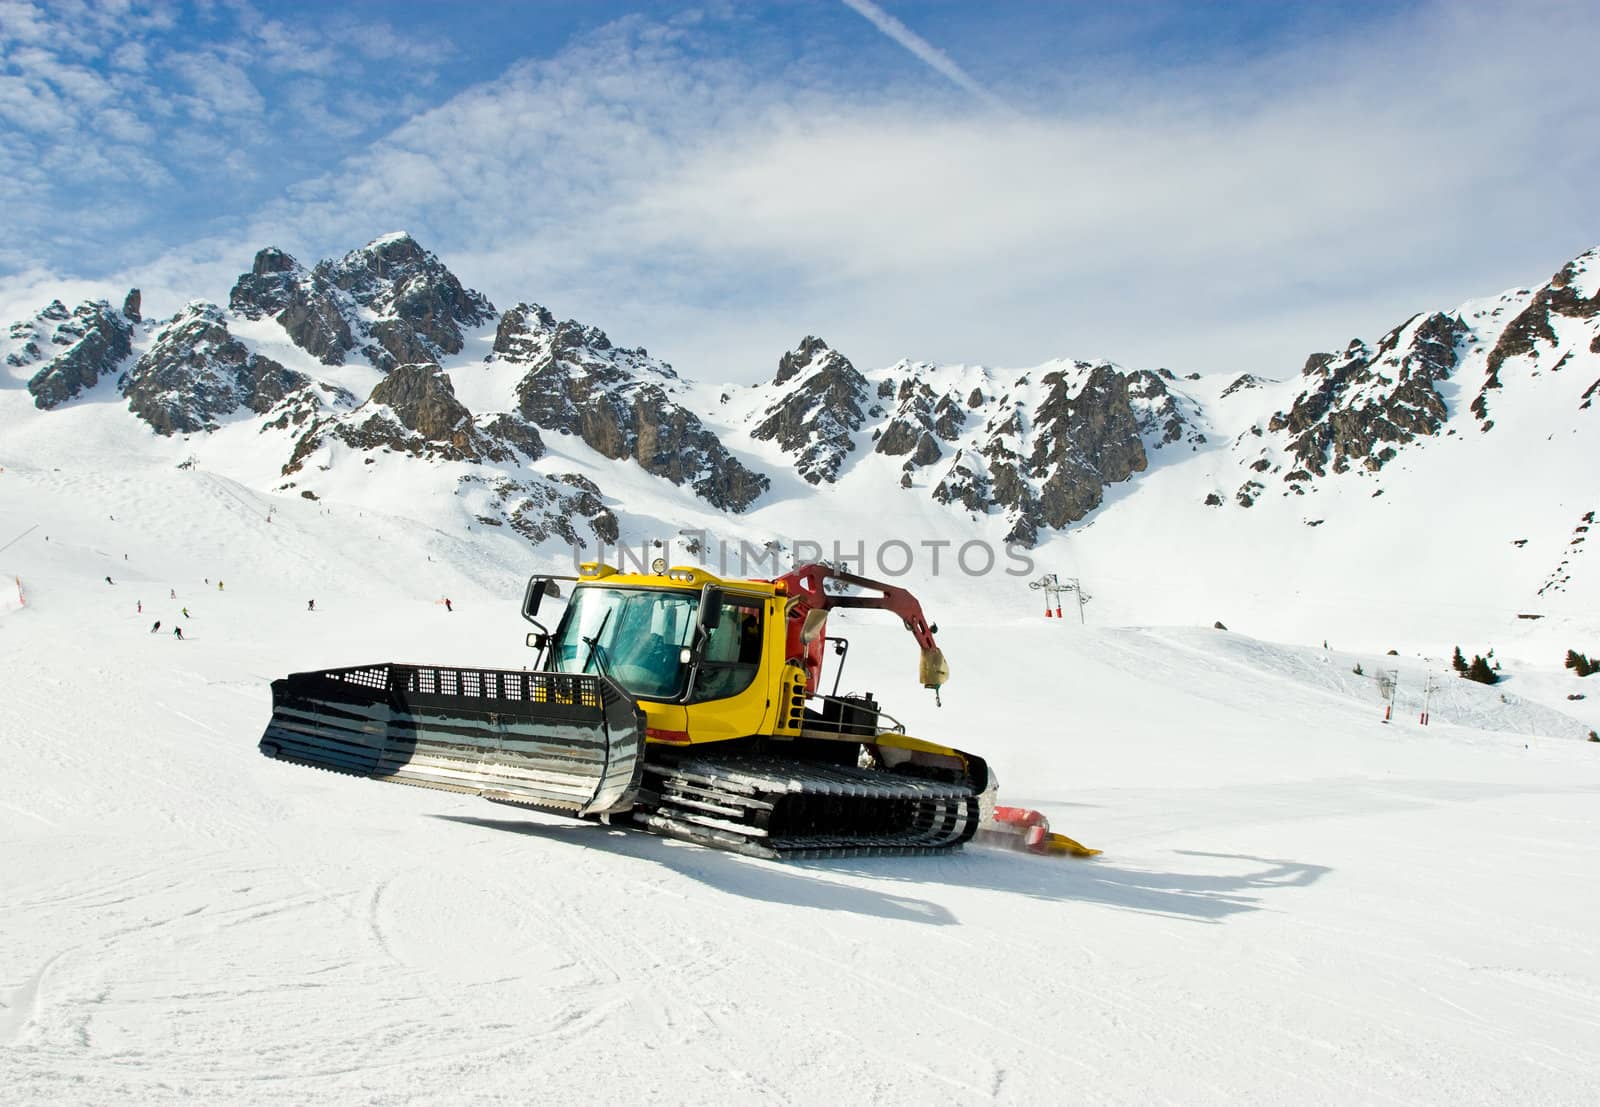 A snowcat grooming the ski slopes at French Alps